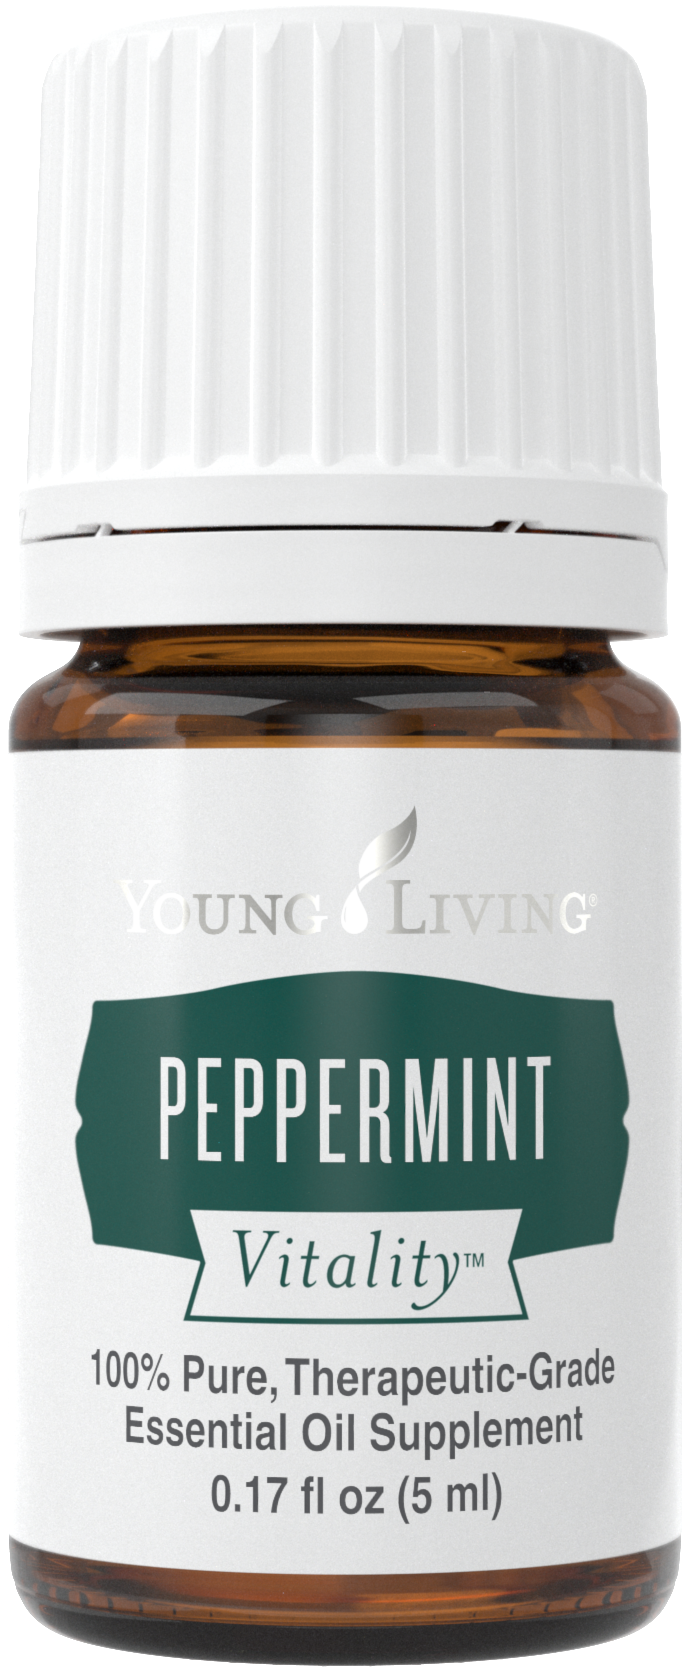 Peppermint Vitality Silo.png